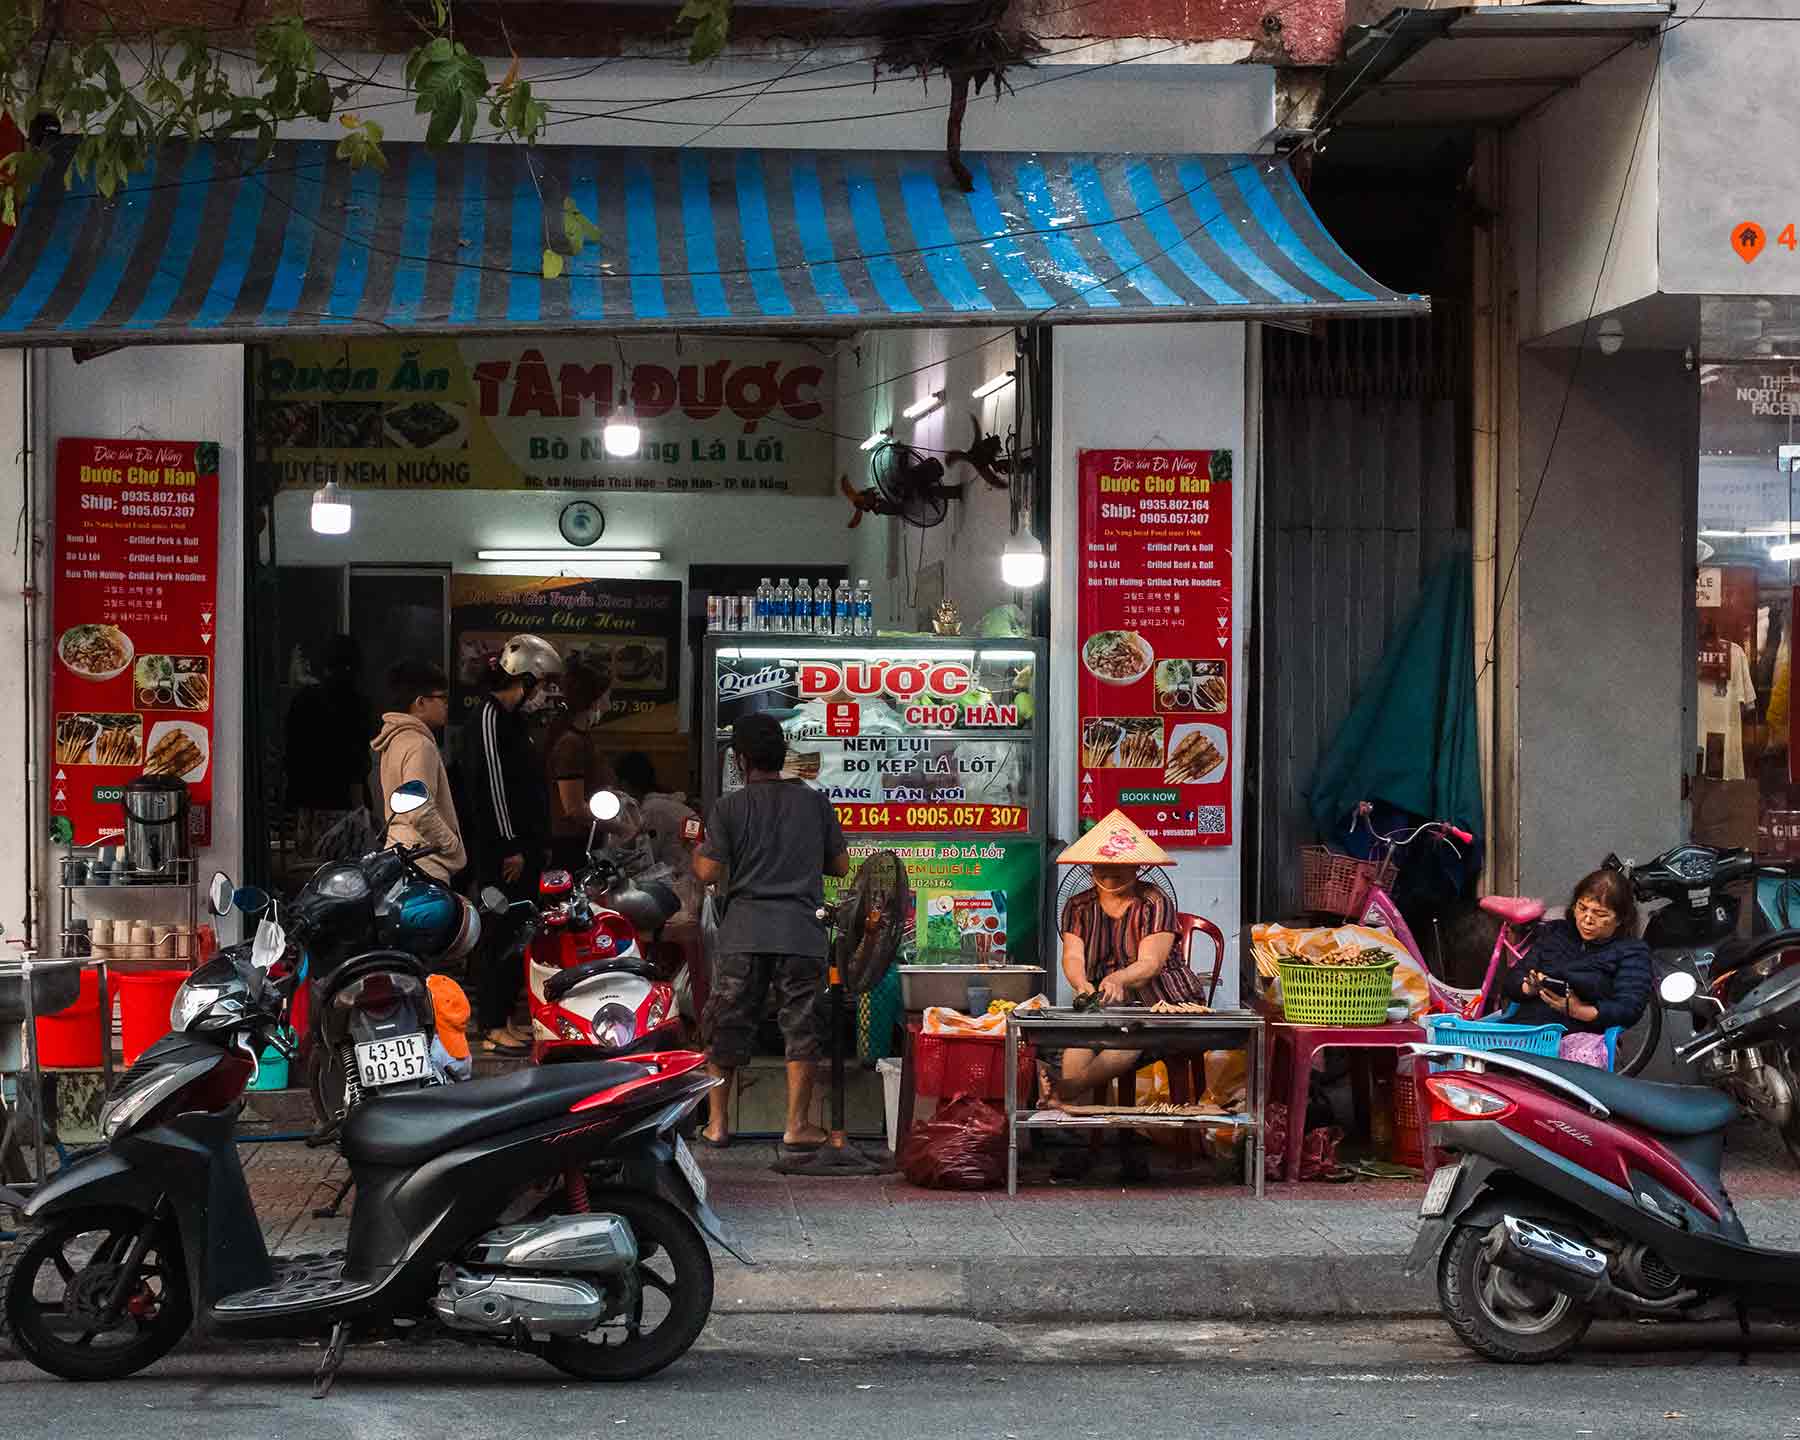 Motorbikes parked at a bustling food storefront in Hanoi Vietnam.